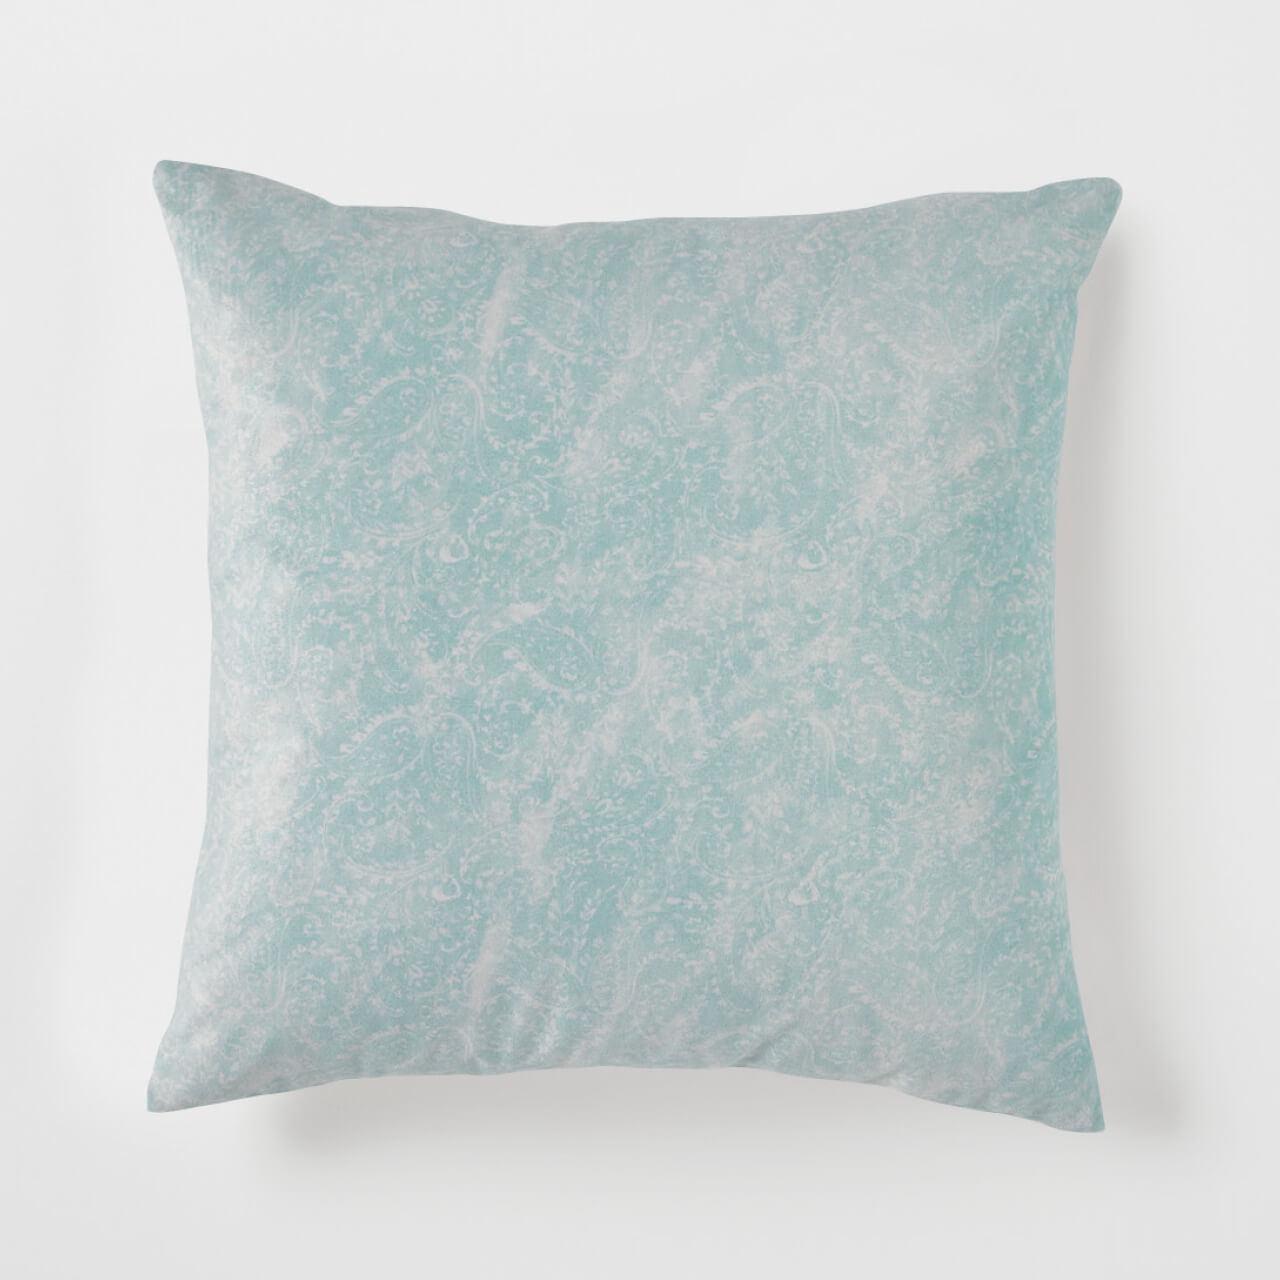 Alyssa Cushion Cover on a white background